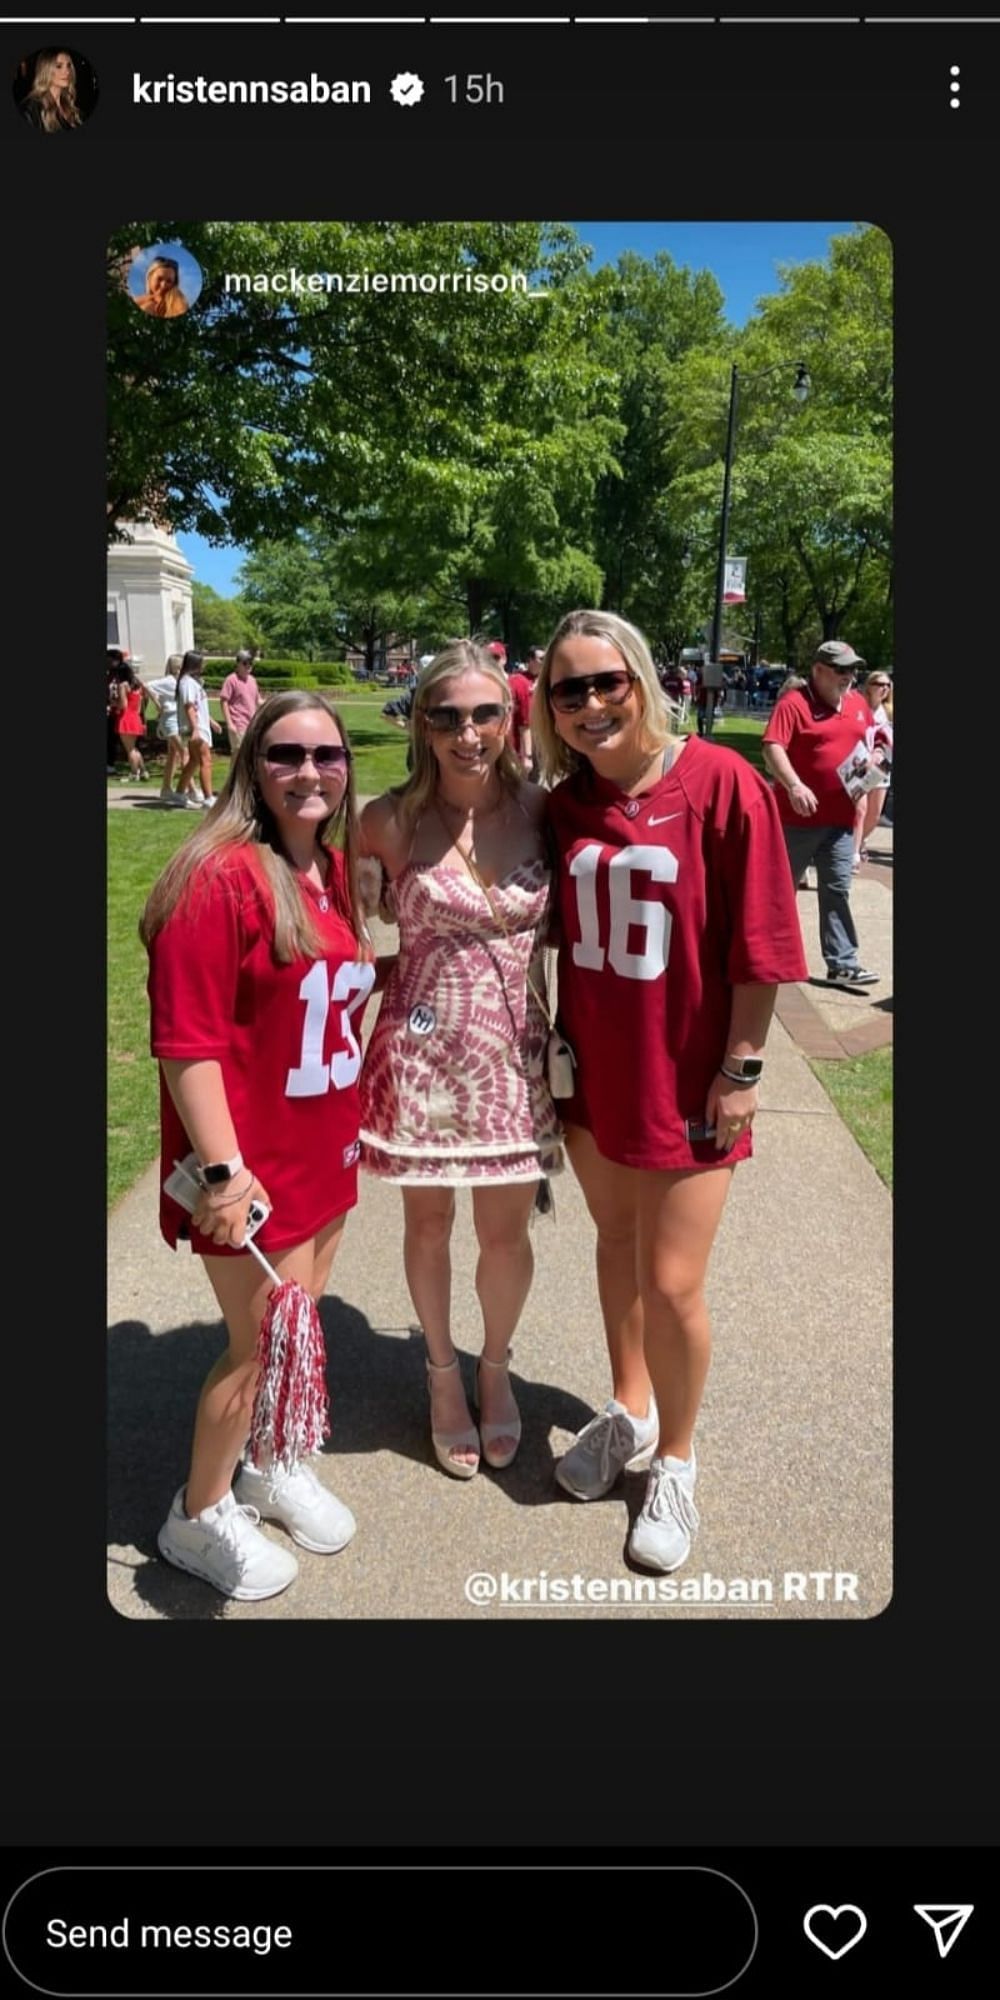 Kristen posing with the fans on A-Day.